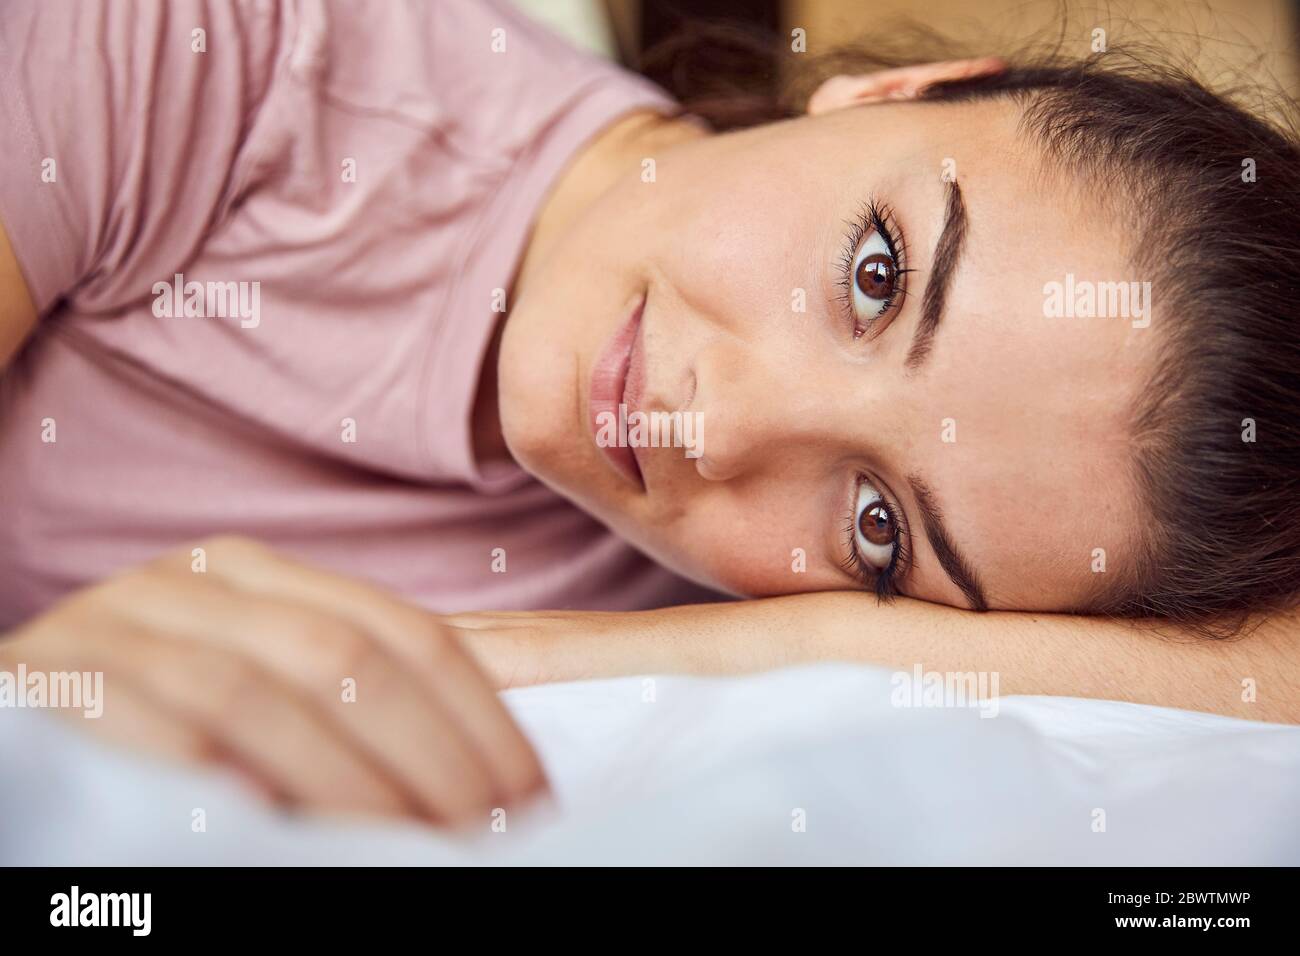 Portrait of young woman with brown eyes lying on bed Stock Photo